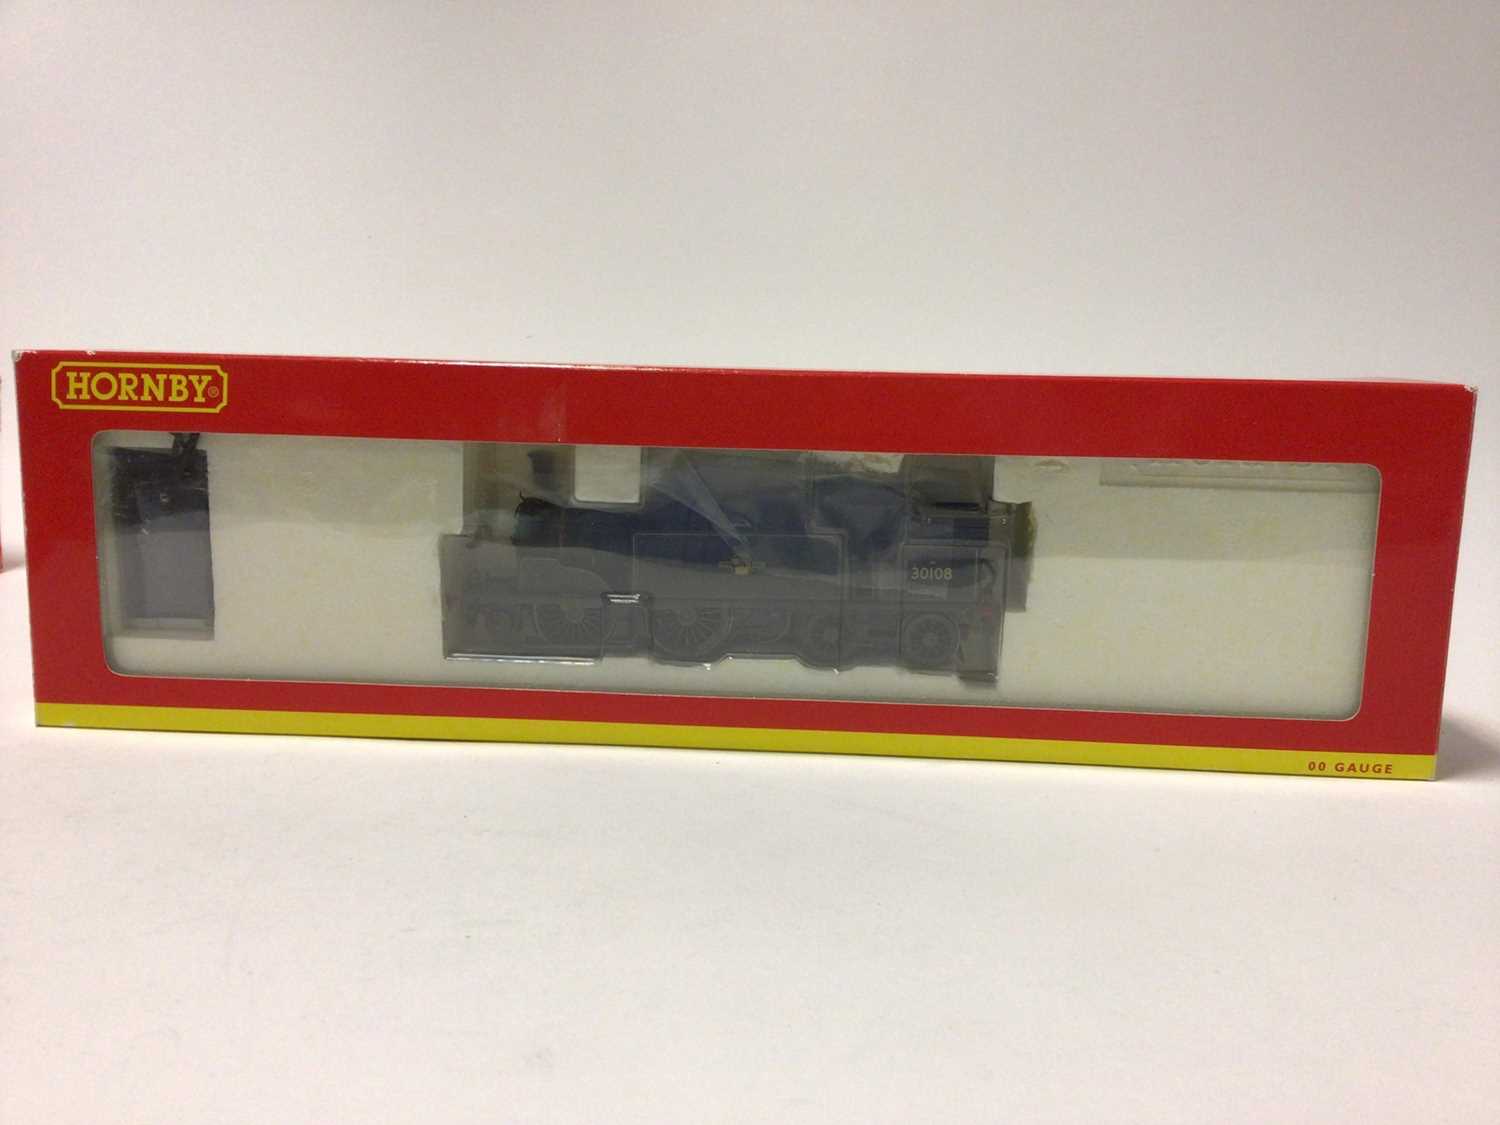 Railway OO Gauge boxed selection including Hornby Class N2 locomotive "69456", R 2178 A Class M7 loc - Image 5 of 6